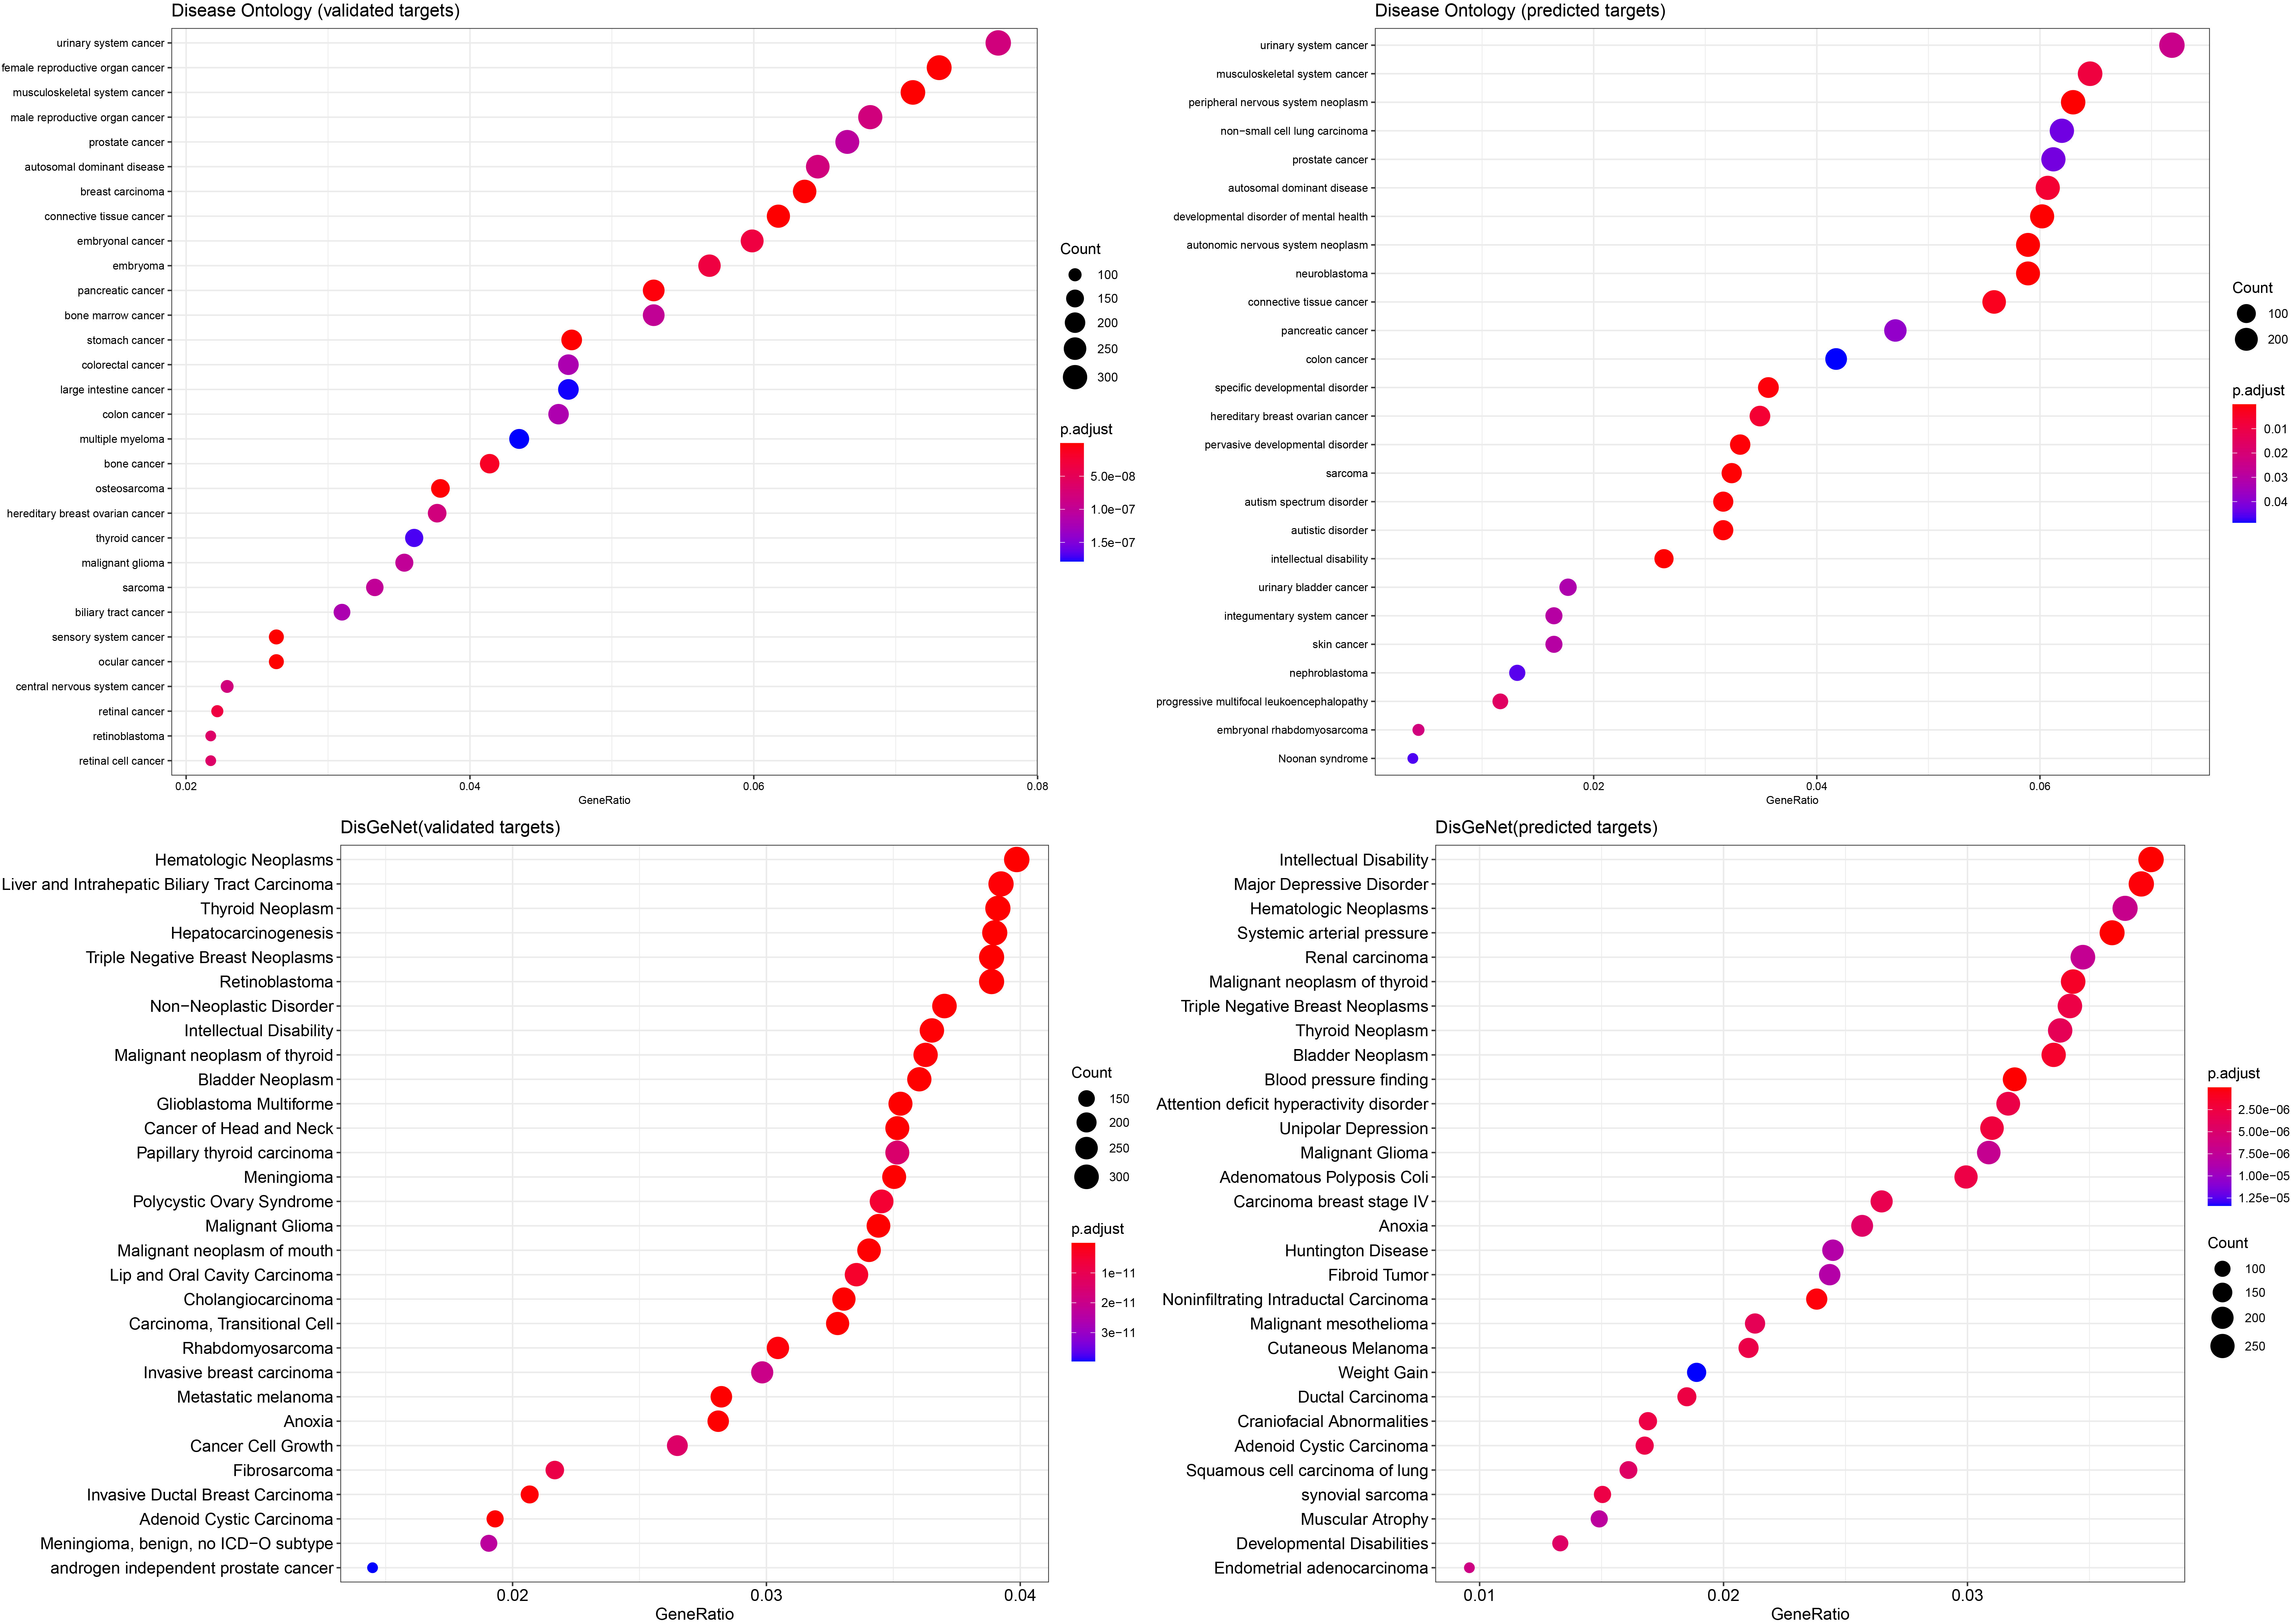 Validation of the miRNA predictors using Disease Ontology and the DisGeNet database. Lists of validated and predicted target interactions were used and the top 30 results are represented ranked by adjusted p-value (q-value of one-sided Fisher’s exact test).